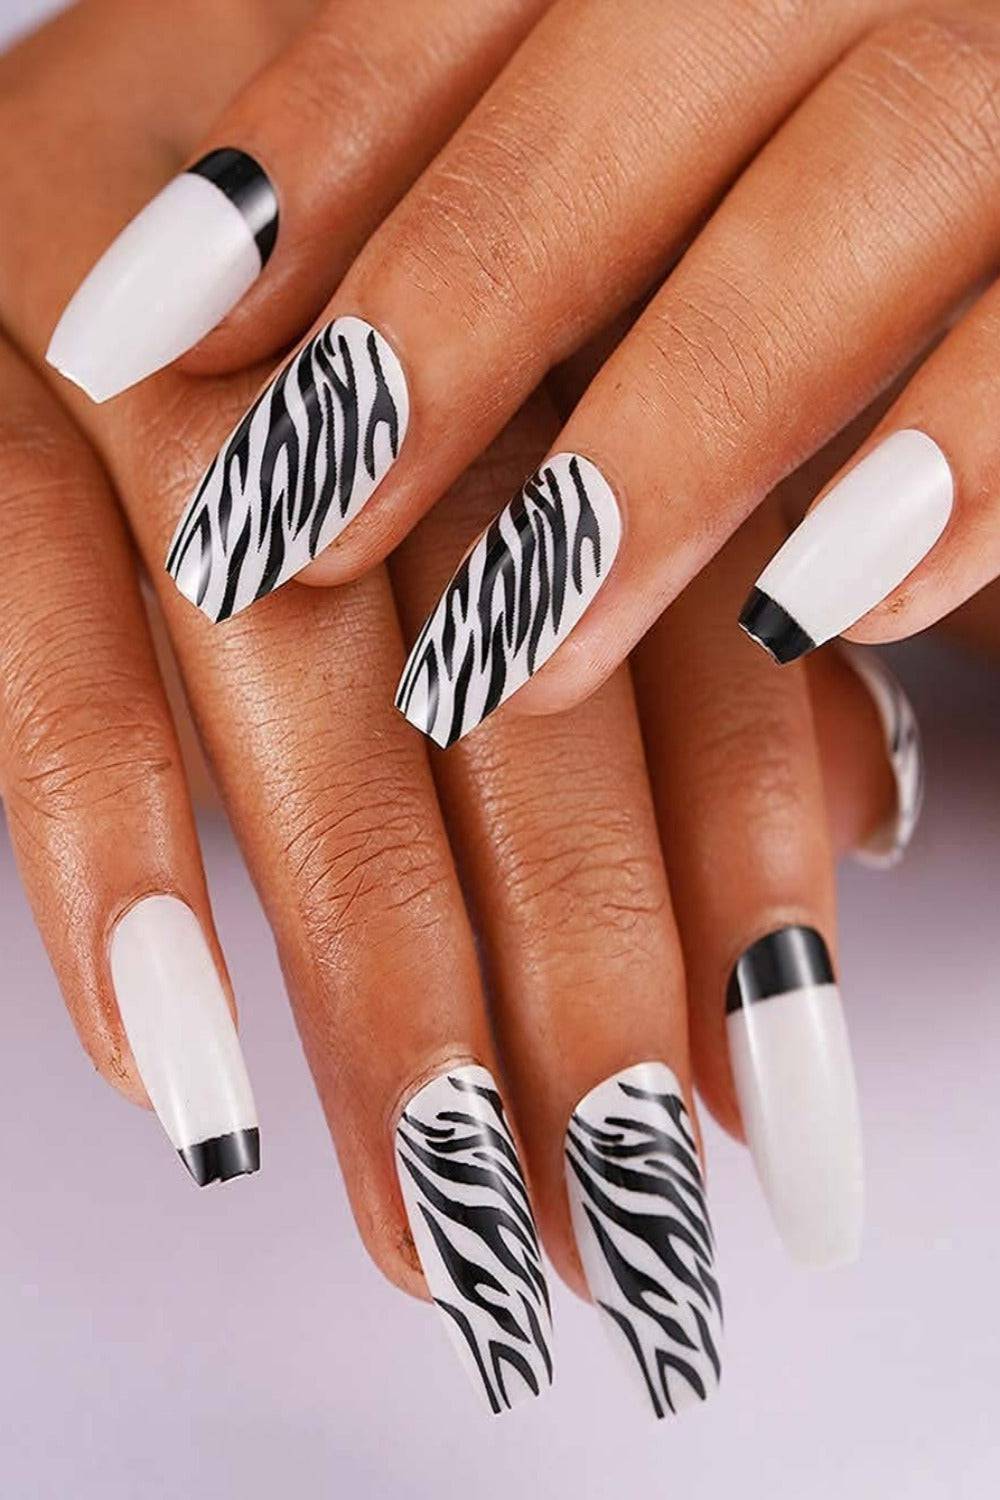 20+ Stunning French Nails With Animal Print Tips Design Ideas!